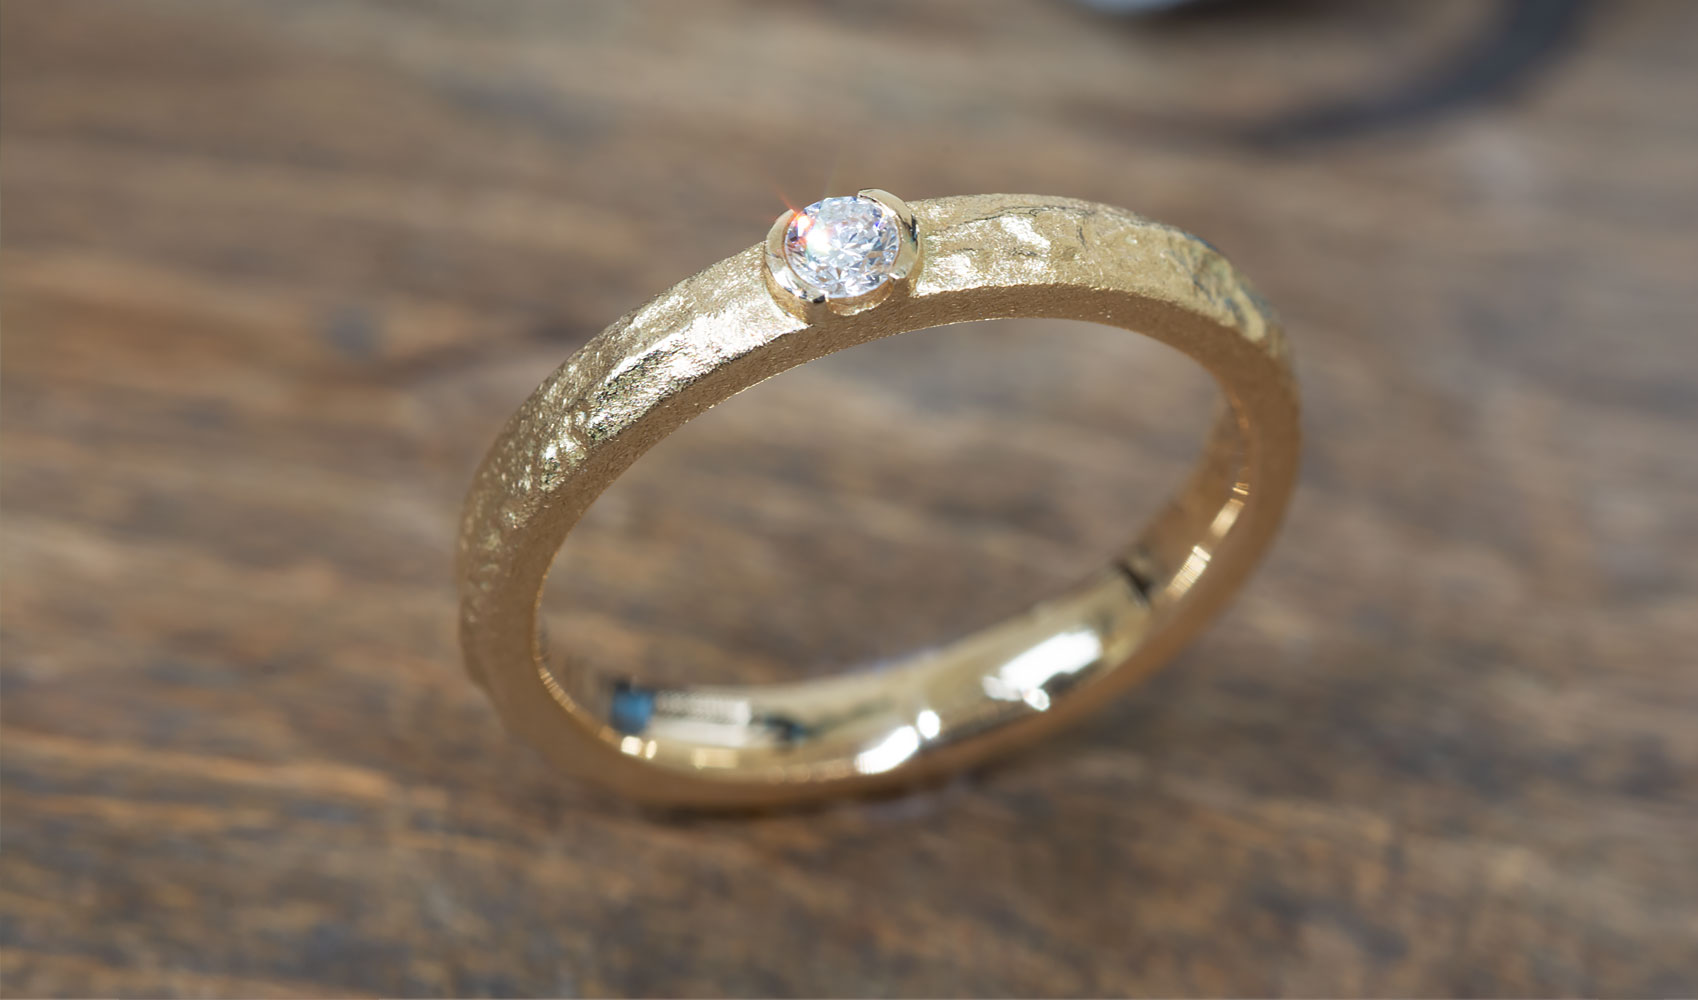 GOLDAFFAIRS - Ring "May" aus Fairmined eco Gelbgold